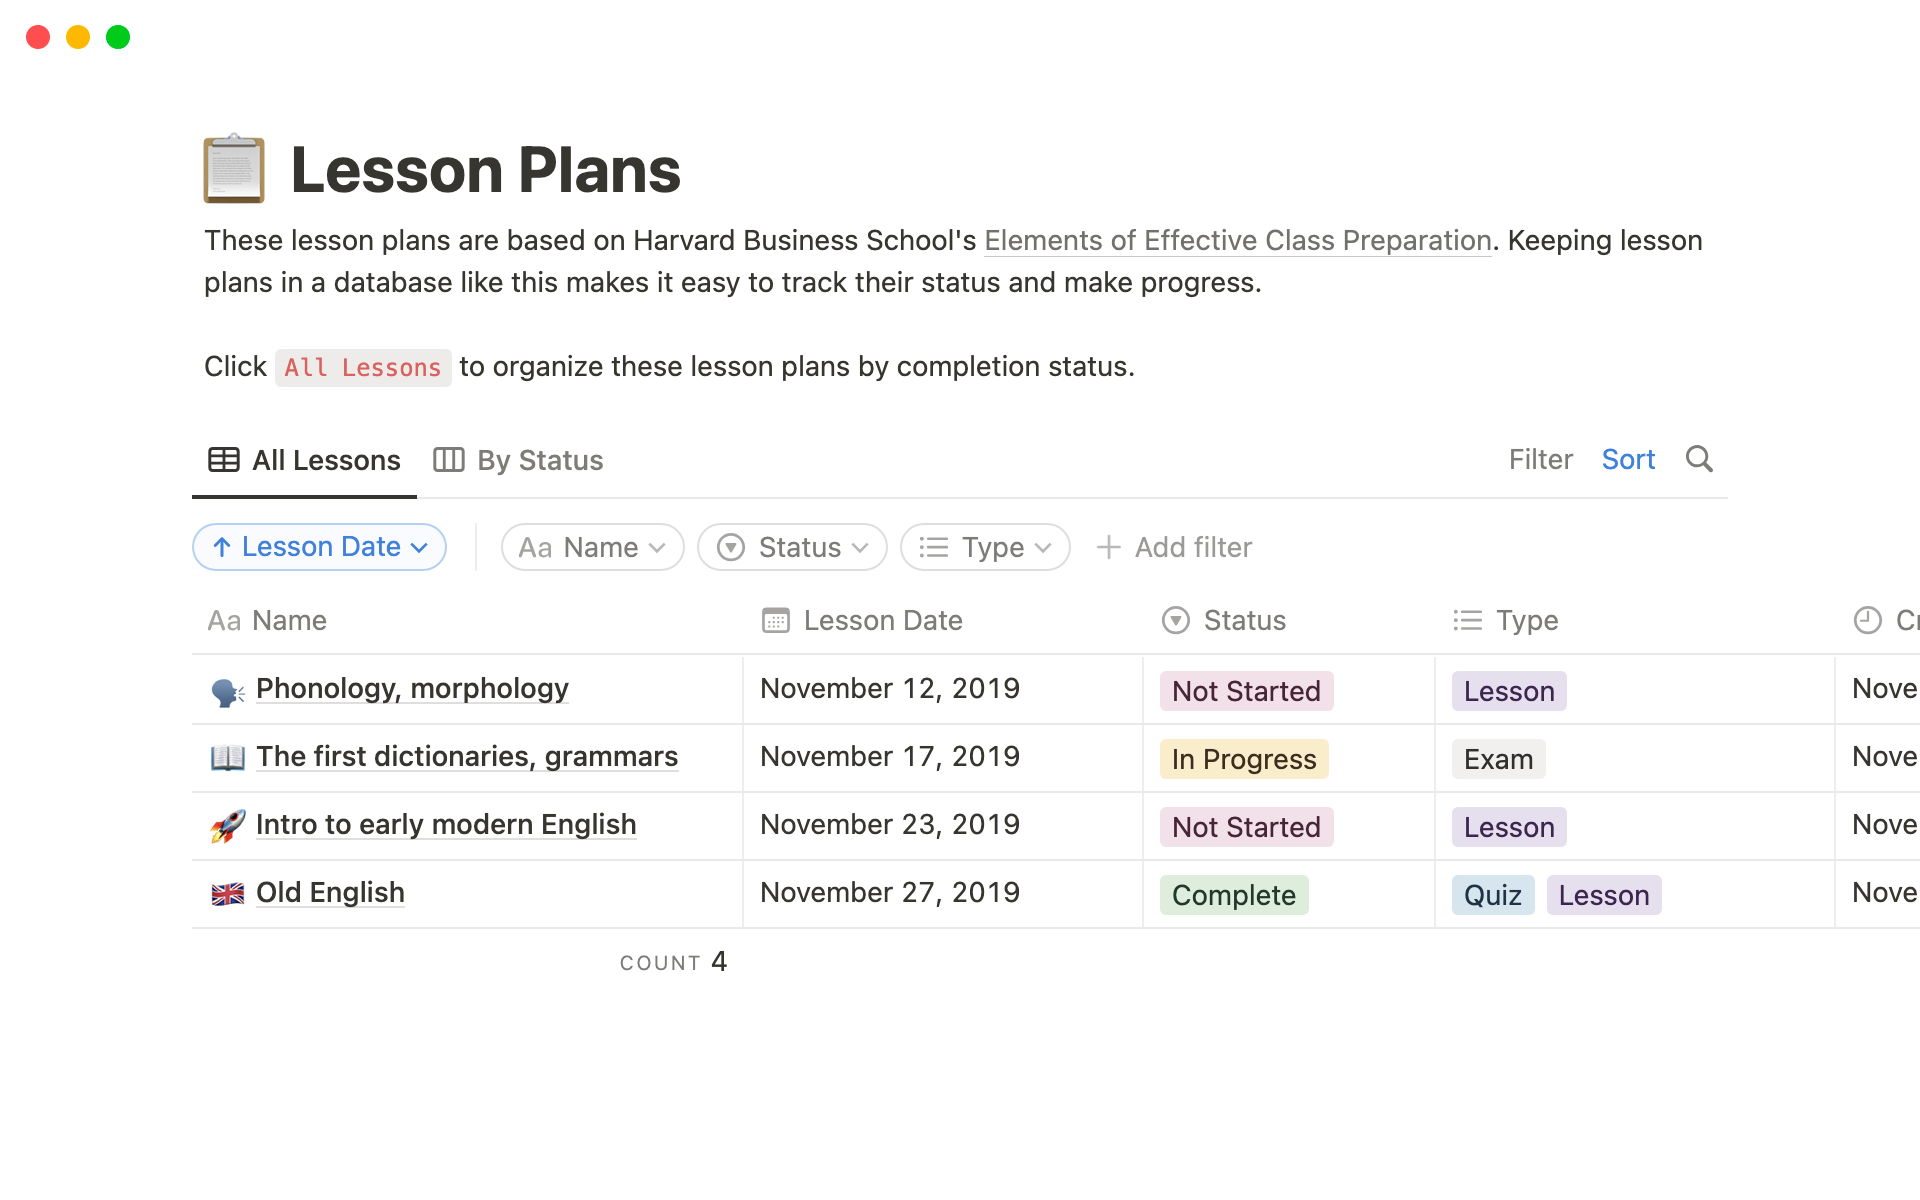 Keep all lesson plans in one database to add relevant notes, track their status and make progress.